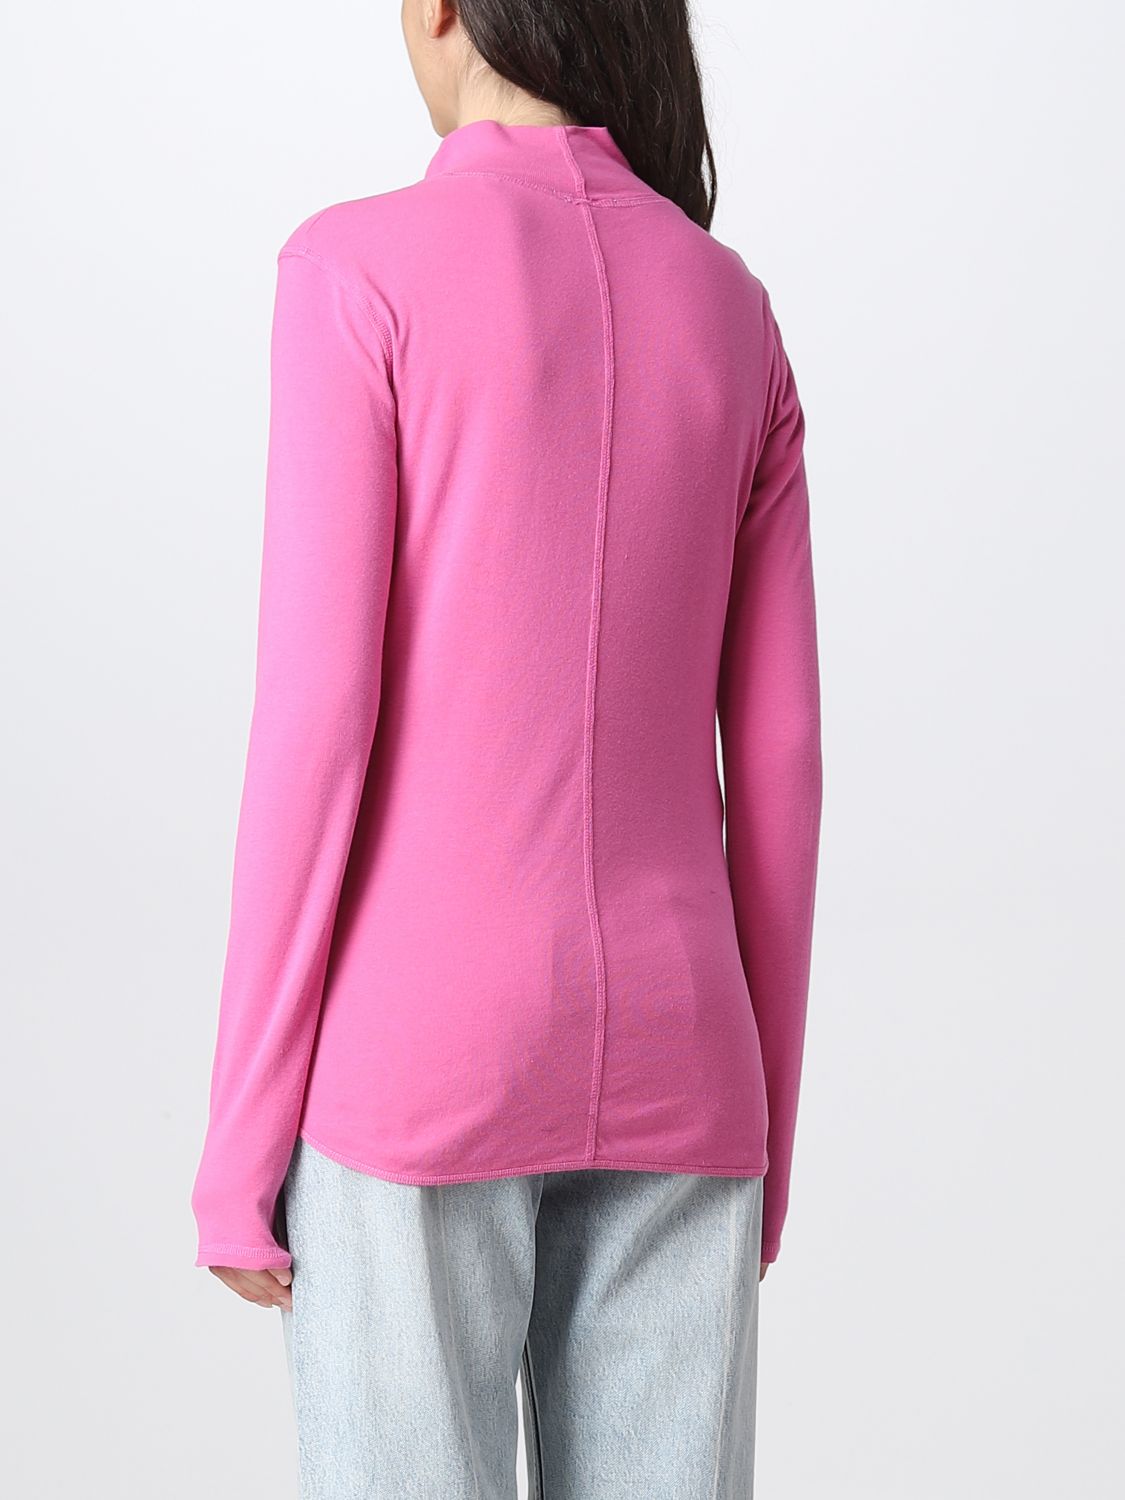 Top Our Legacy: Our Legacy top for woman pink 3